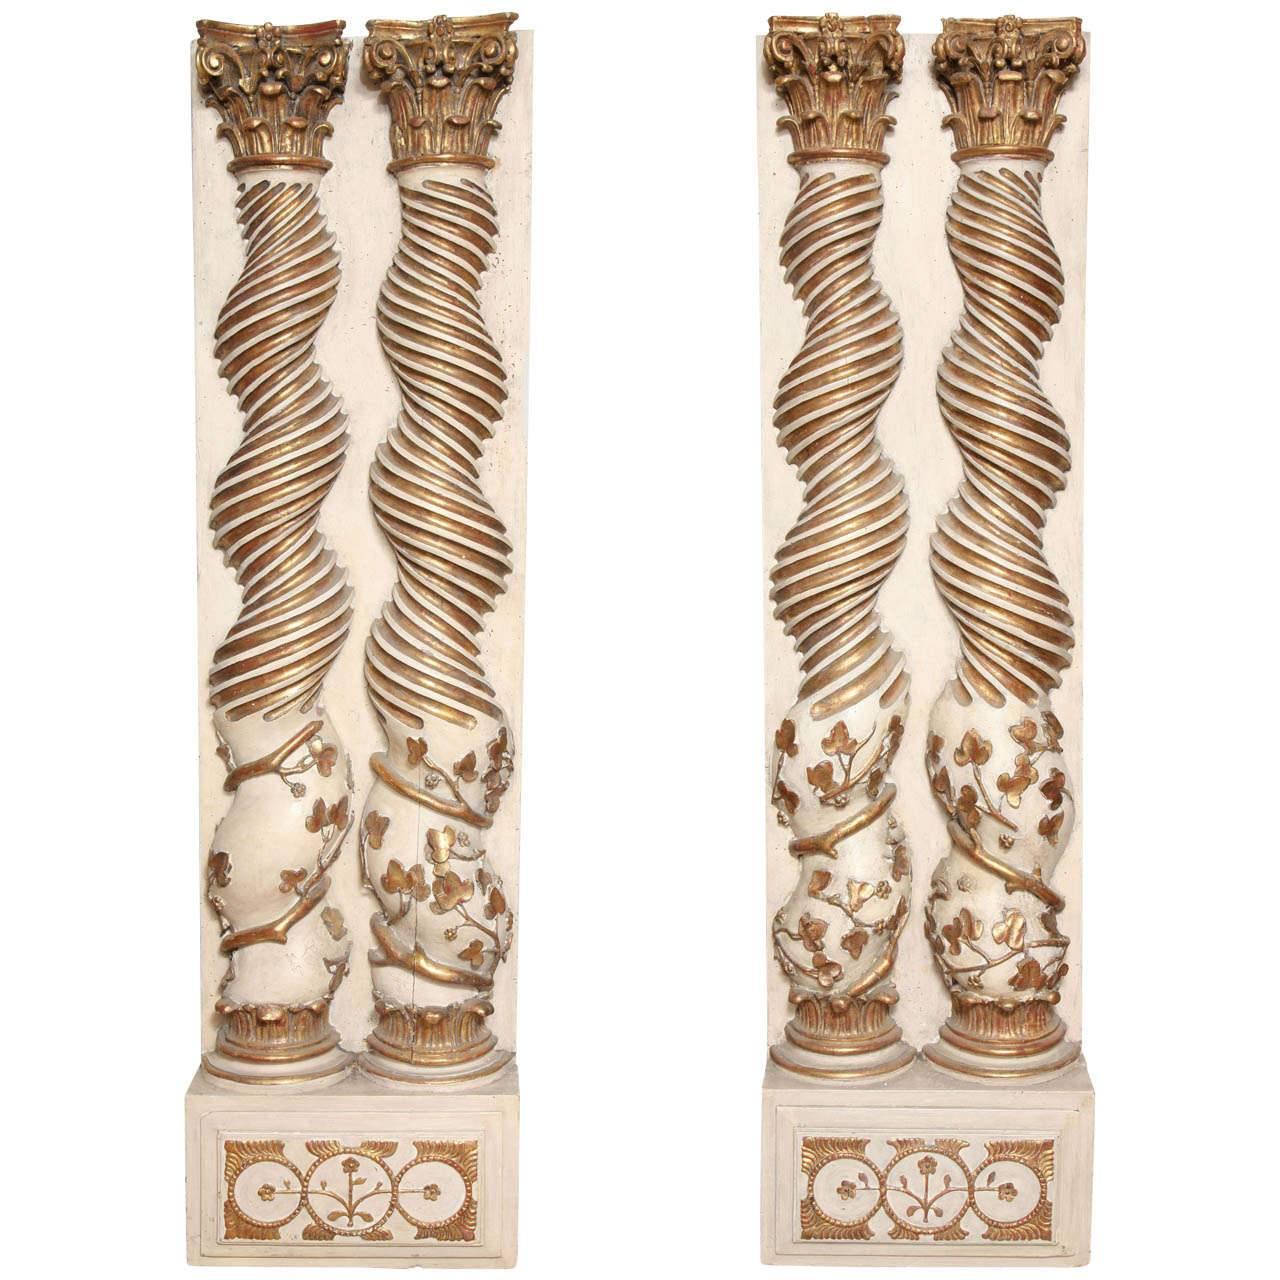 Pair of Hand-Carved Solominic Half Columns in the Manner of Bernini